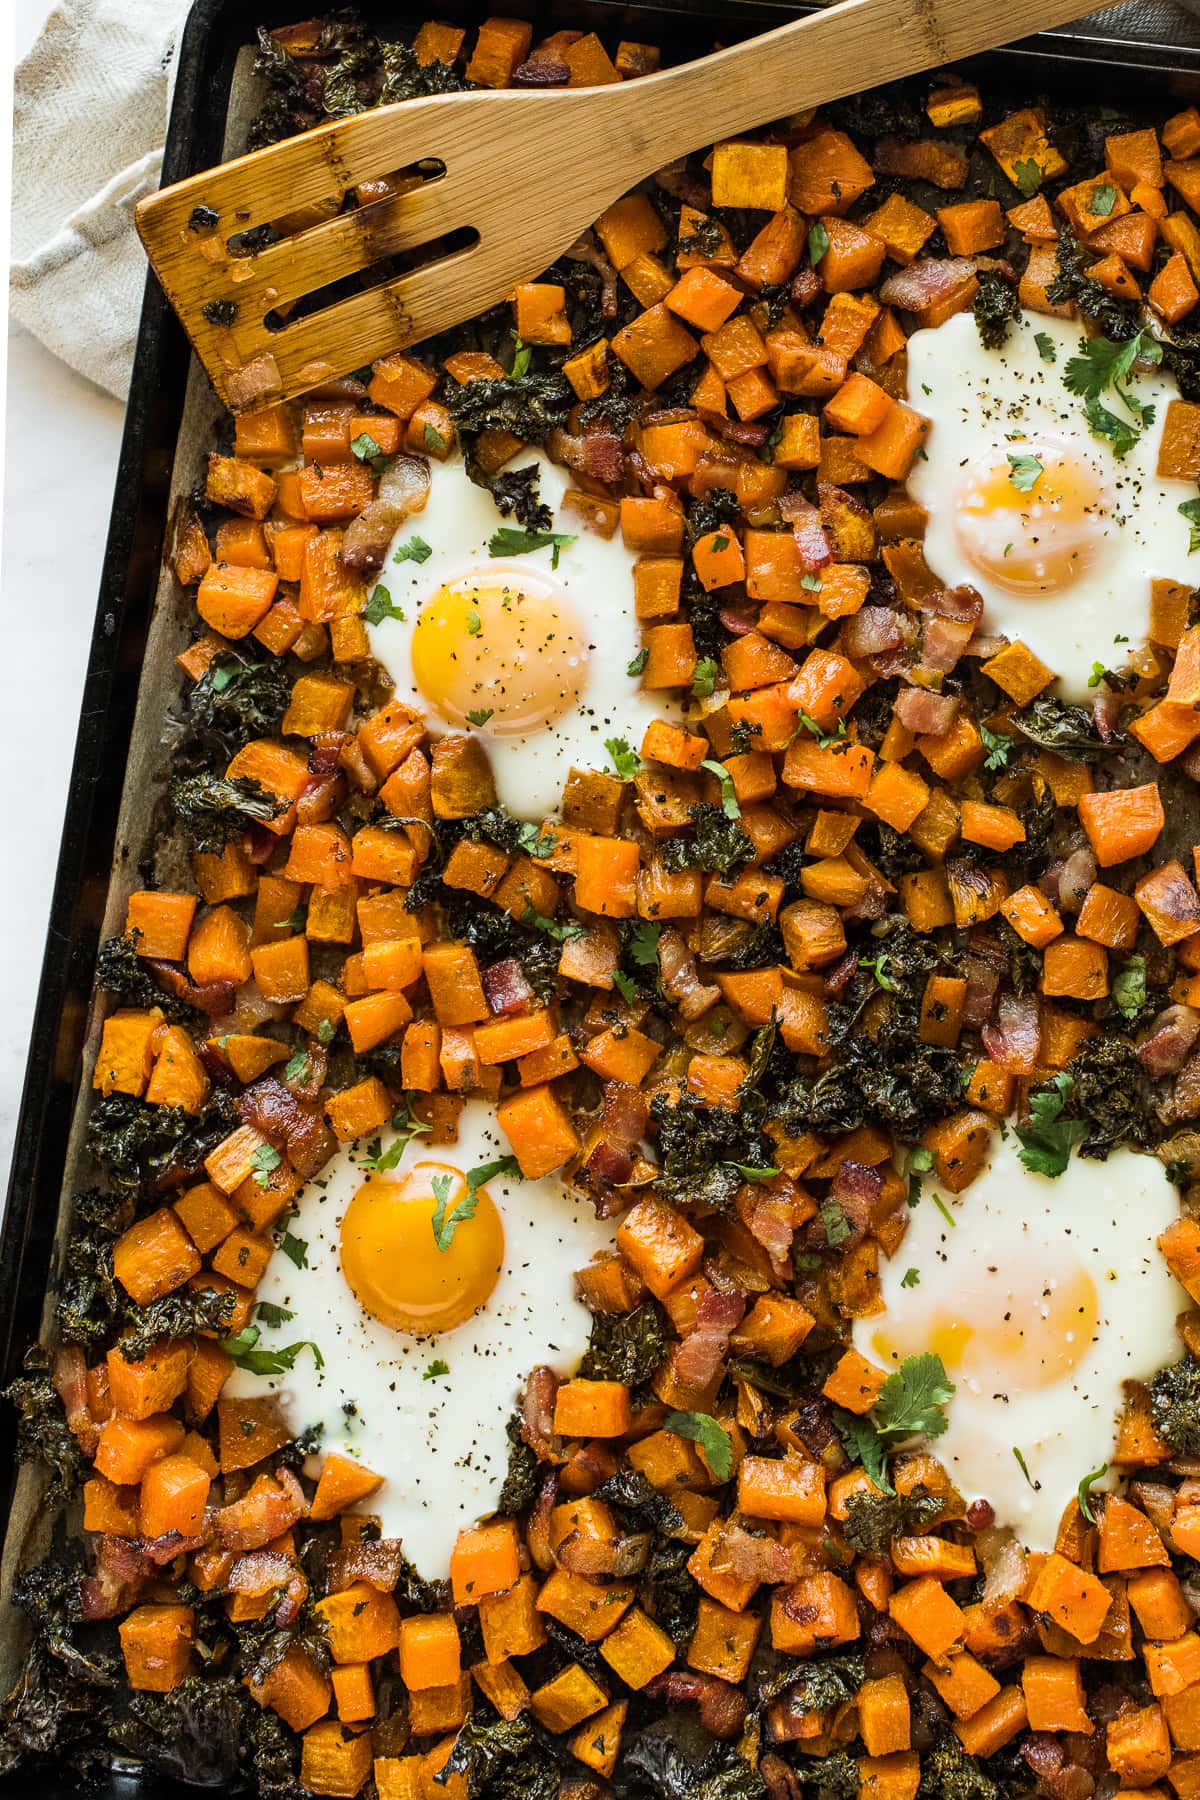 Cooked eggs on a sheet pan with sweet potatoes, kale, and spices.